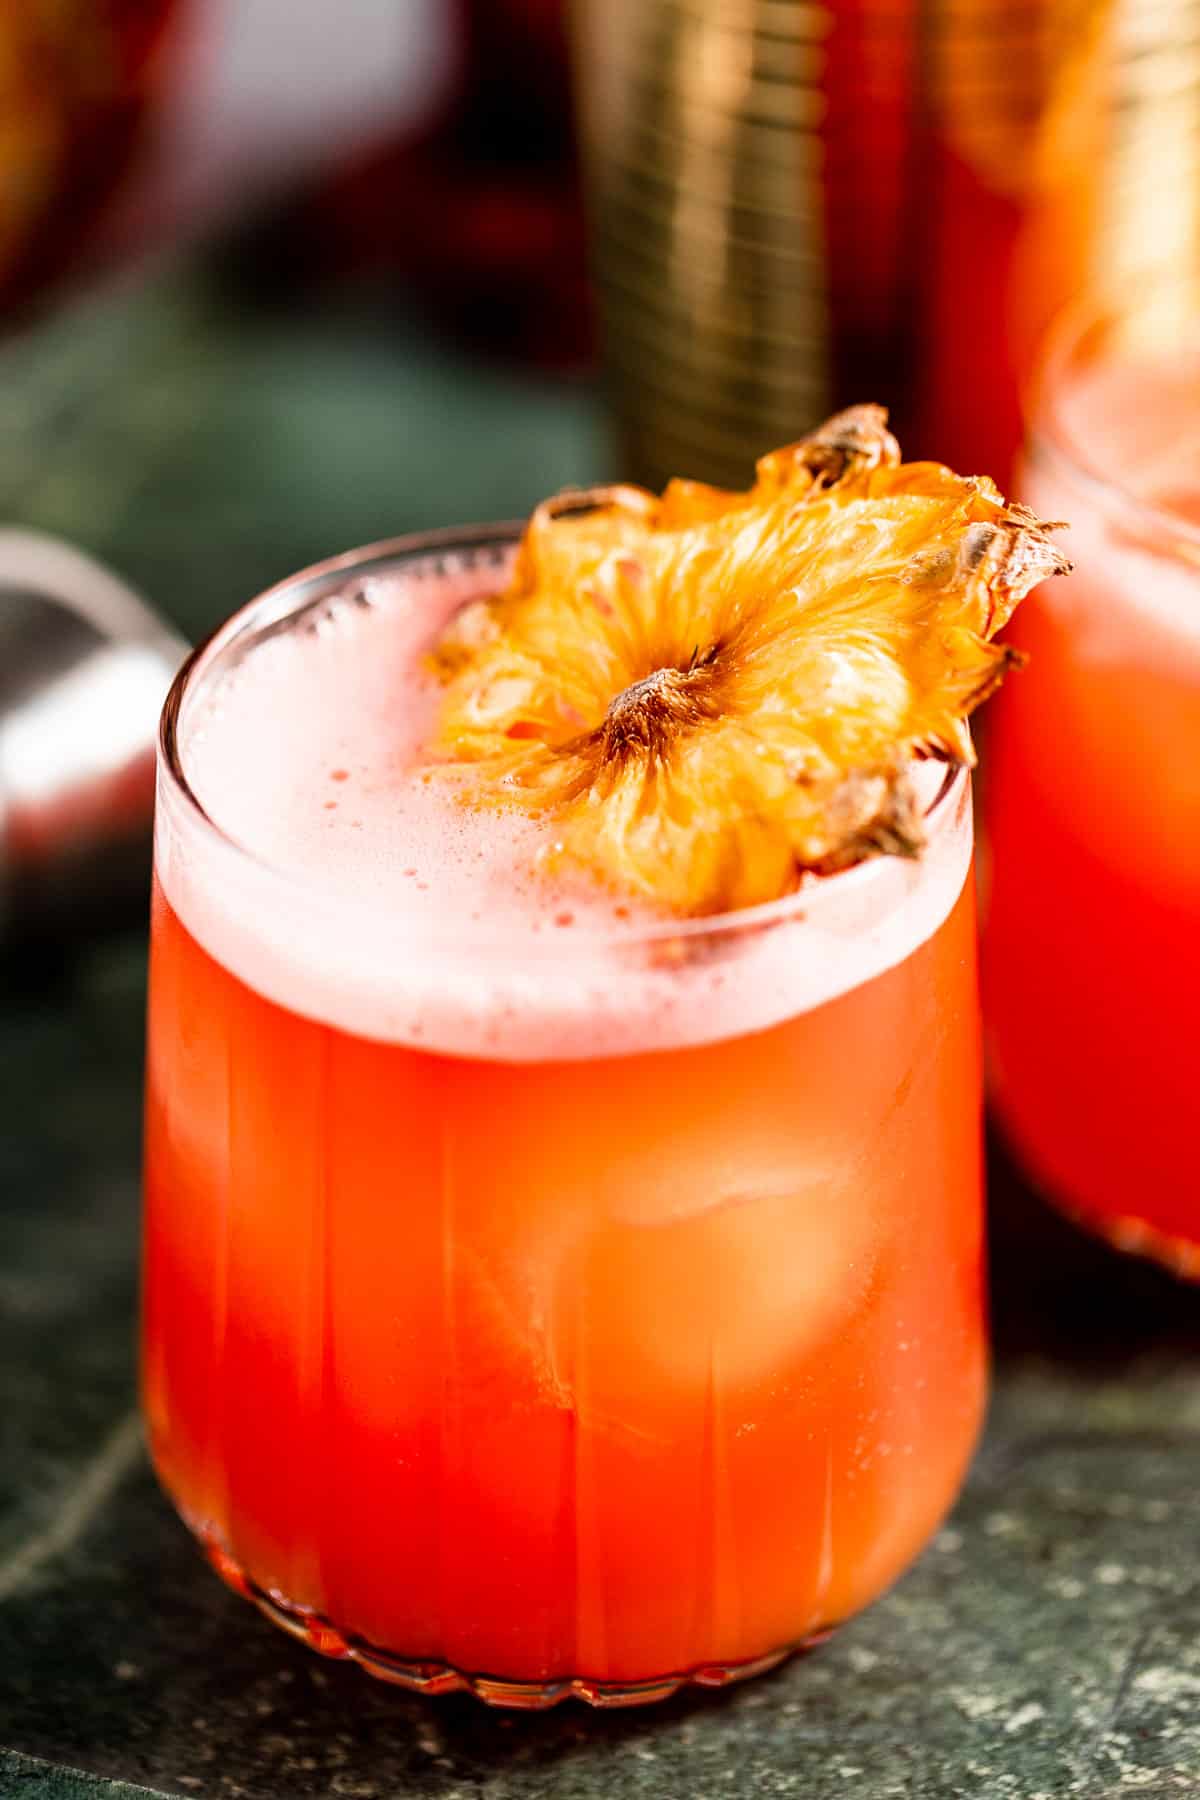 orange cocktail in glass with dried pineapple slice